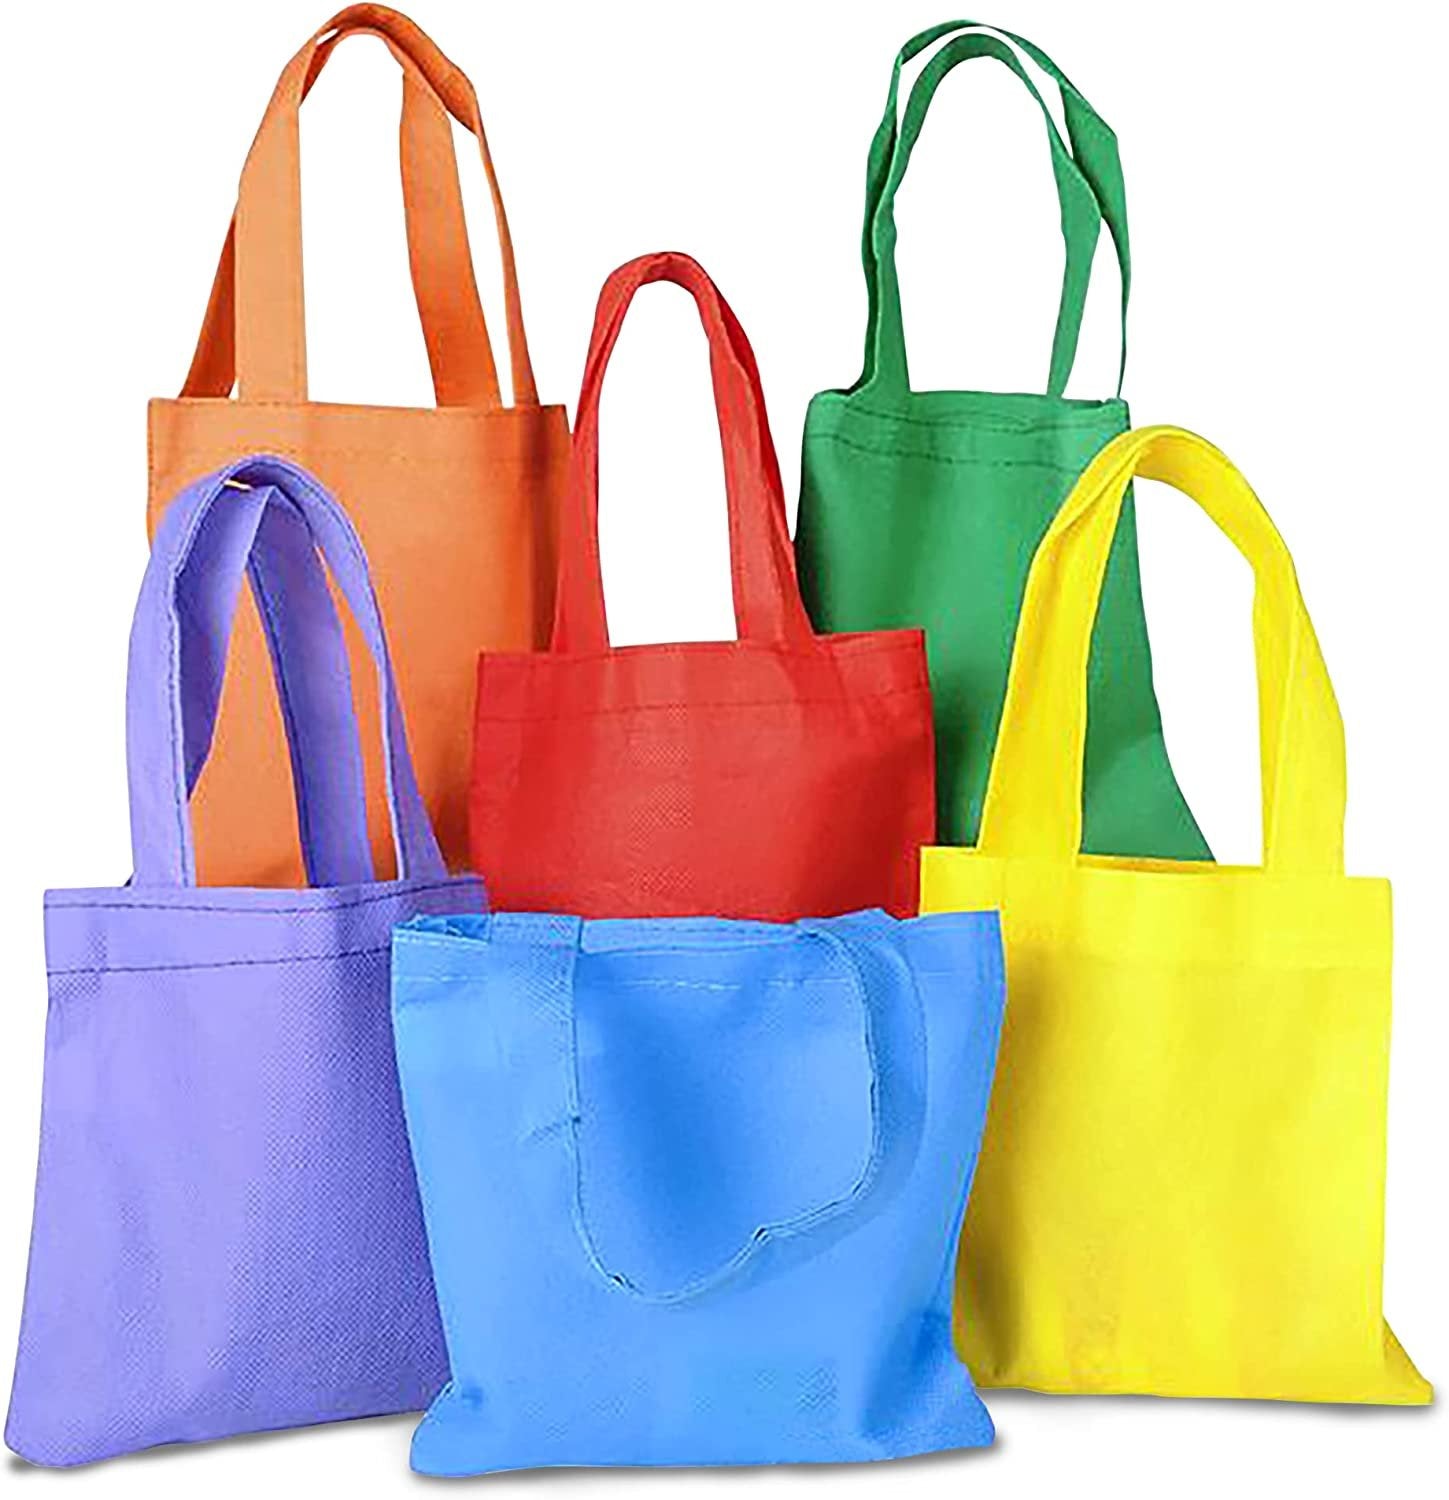 Fabric Tote Goodie Treat Bags - 12 Pack - 6" x 6" Colorful Party Favor Gift Bags for Kids - Durable and Eco-Friendly Supplies - Goody Bags for Birthday, Halloween Candy and More